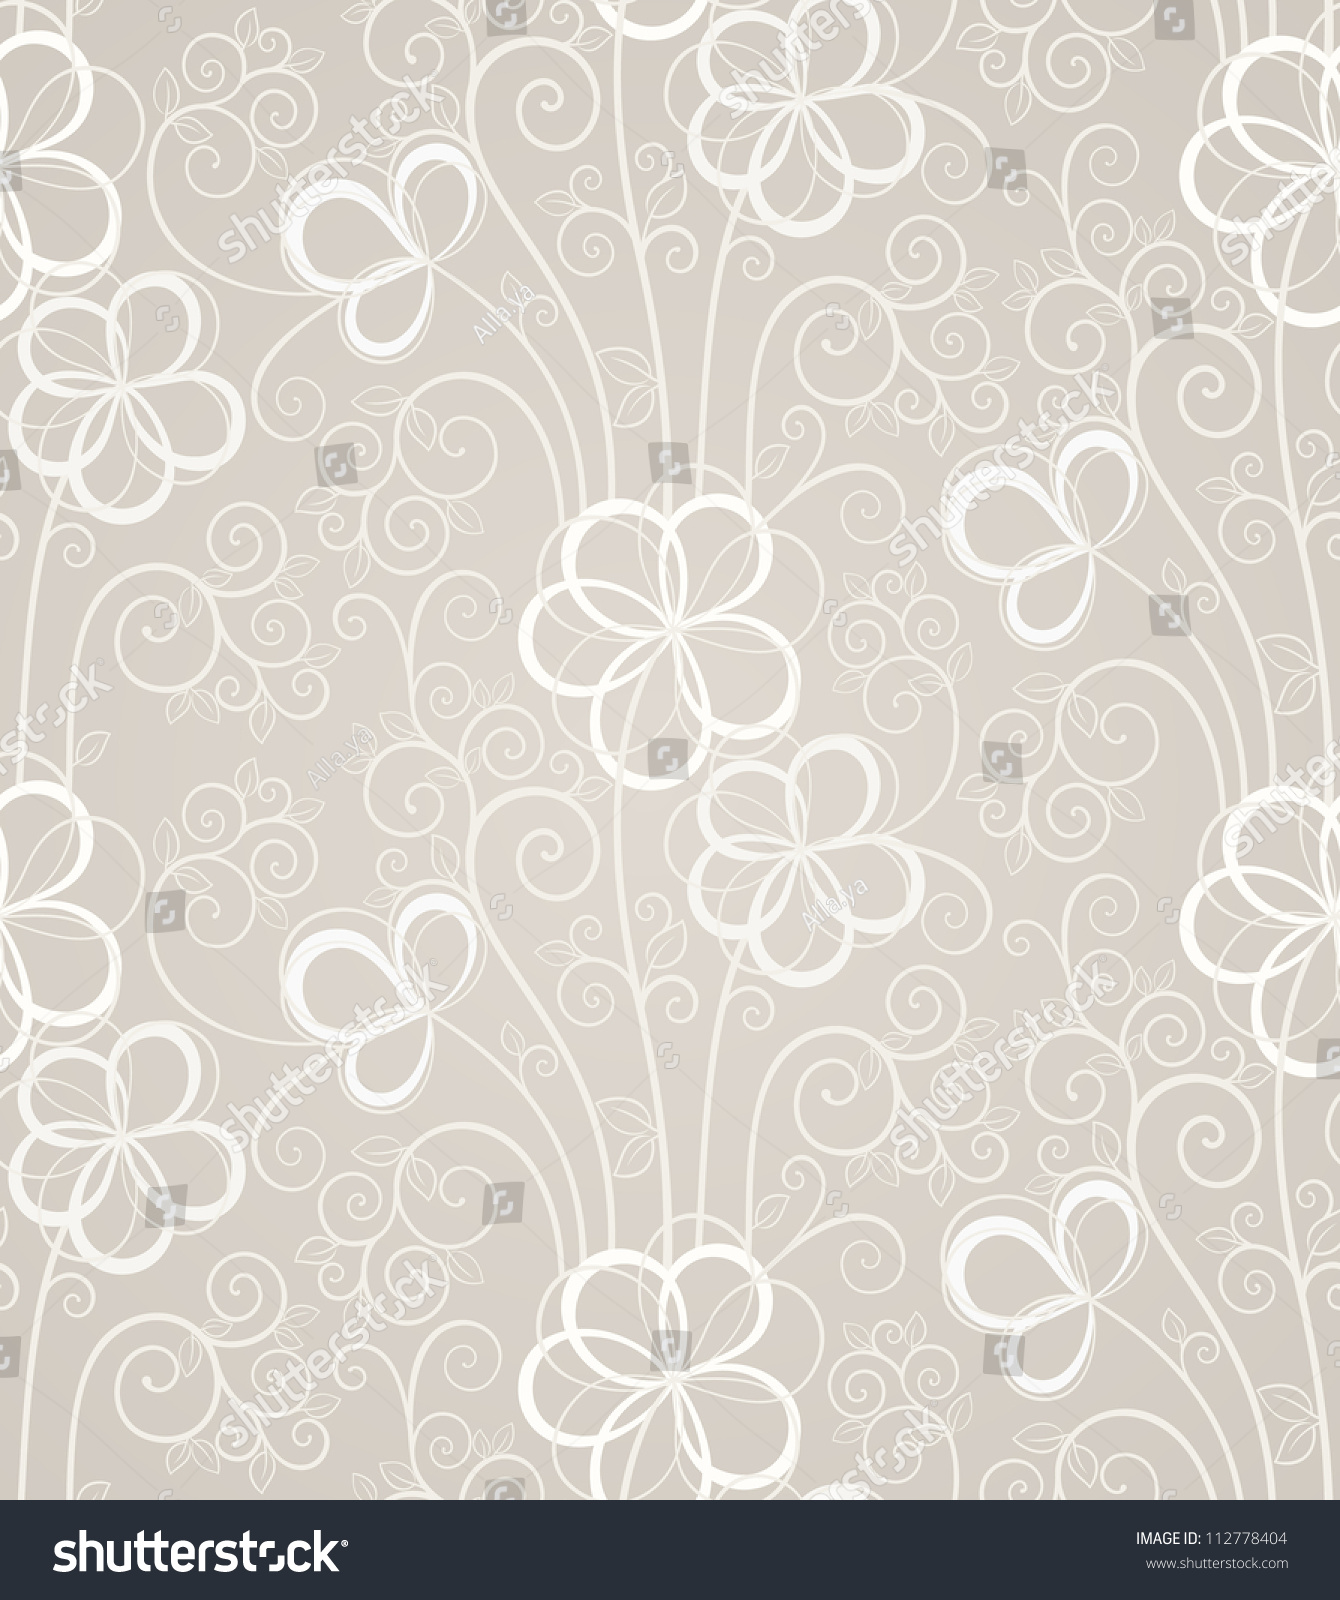 Abstract Floral Seamless Background Grey Tones Stock Vector 112778404 ...